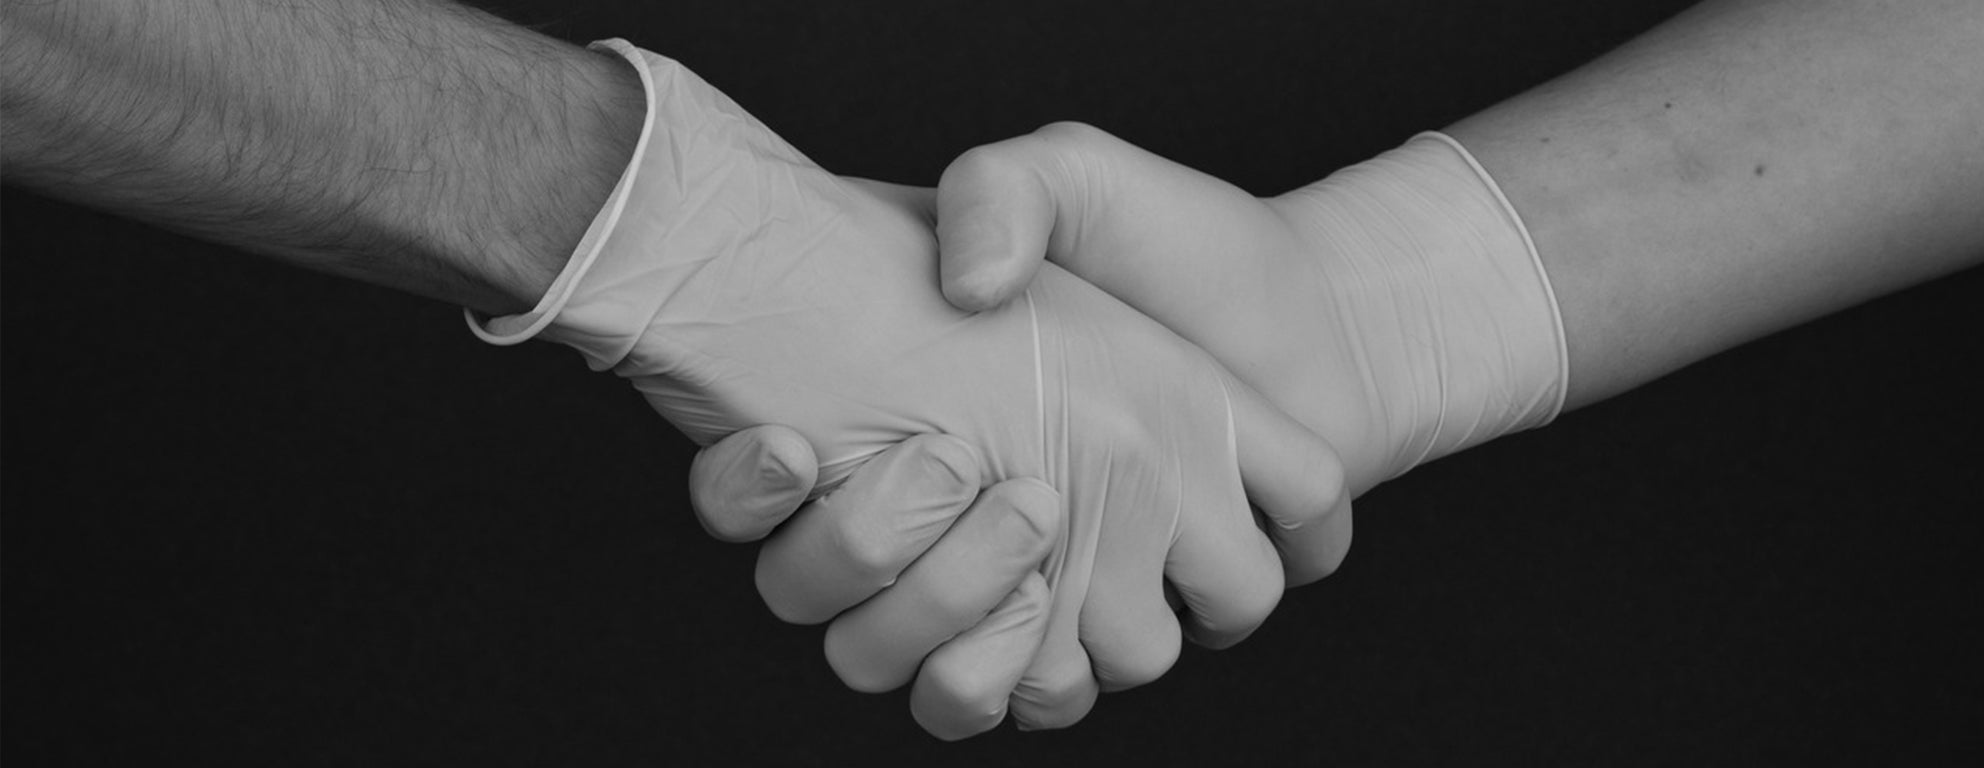 Black and white close up of two hands with medical gloves shaking